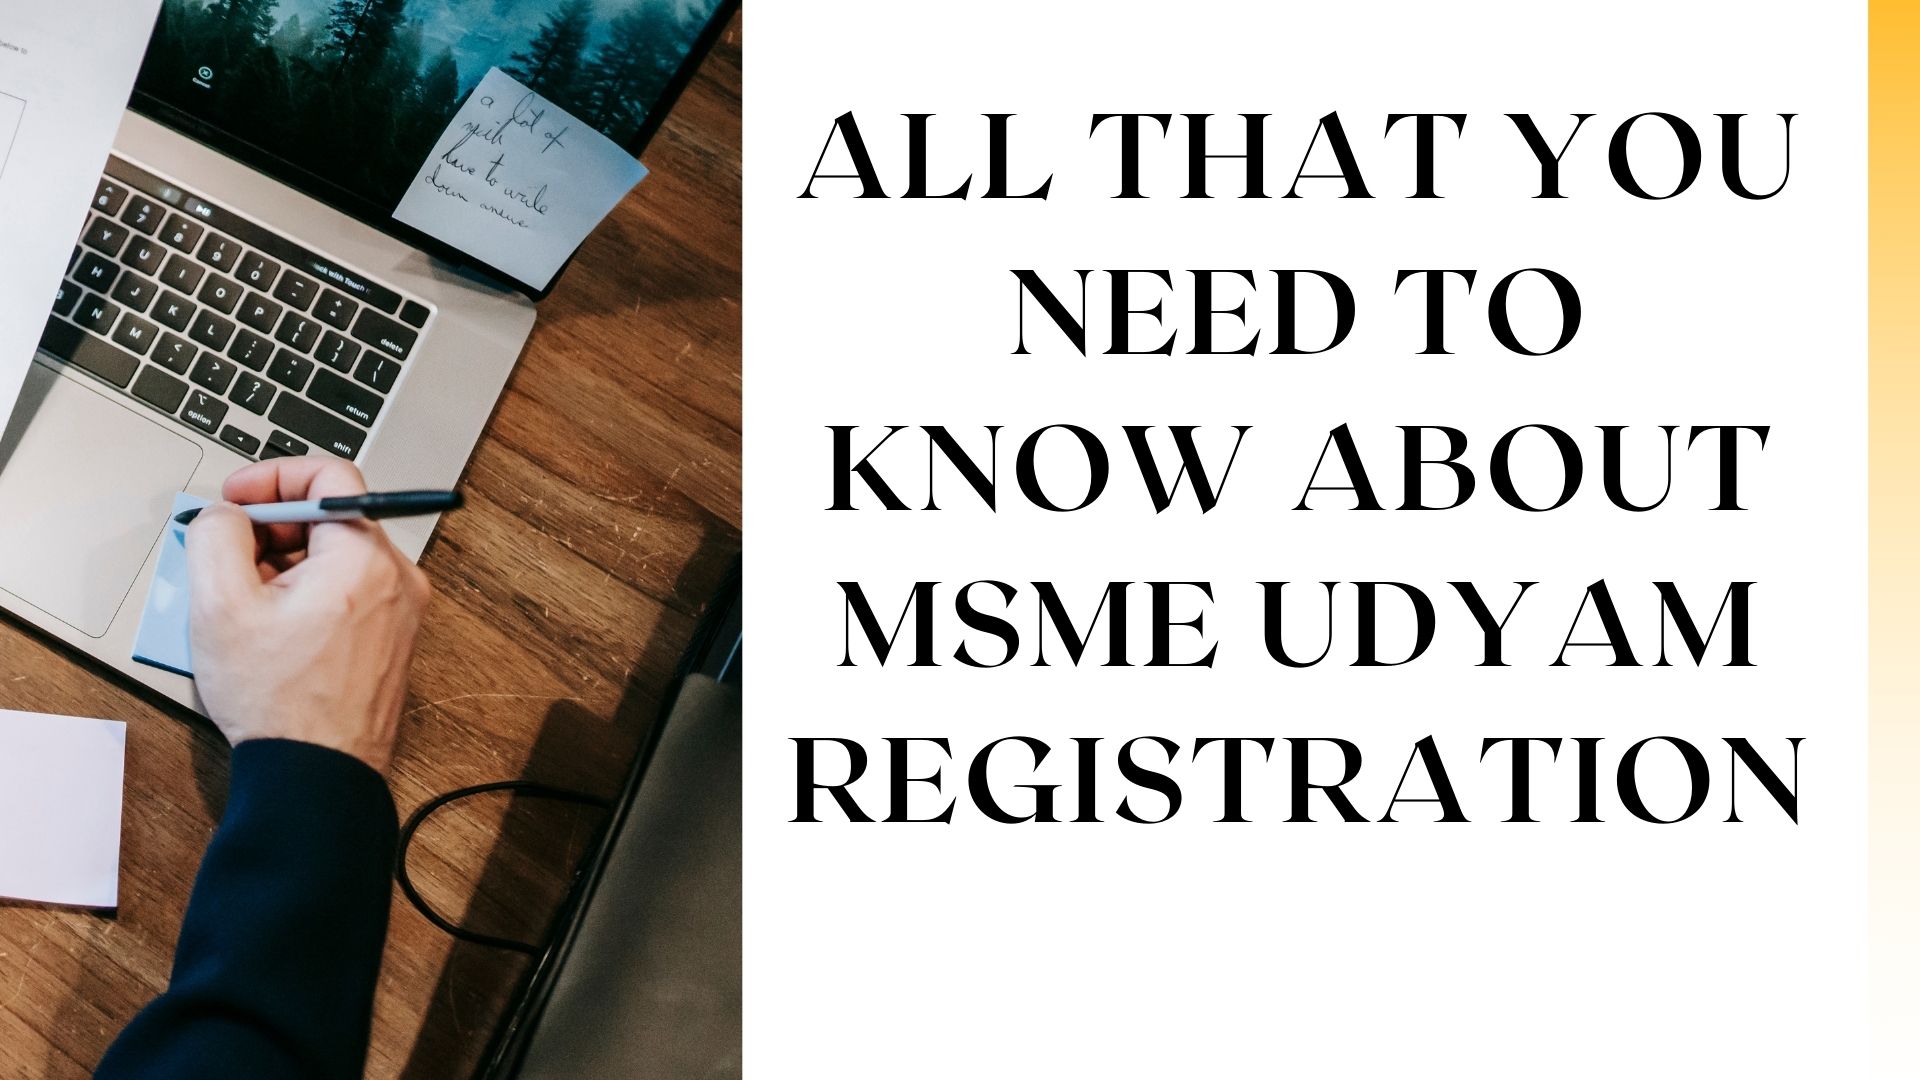 All that You Need to Know About MSME Udyam Registration